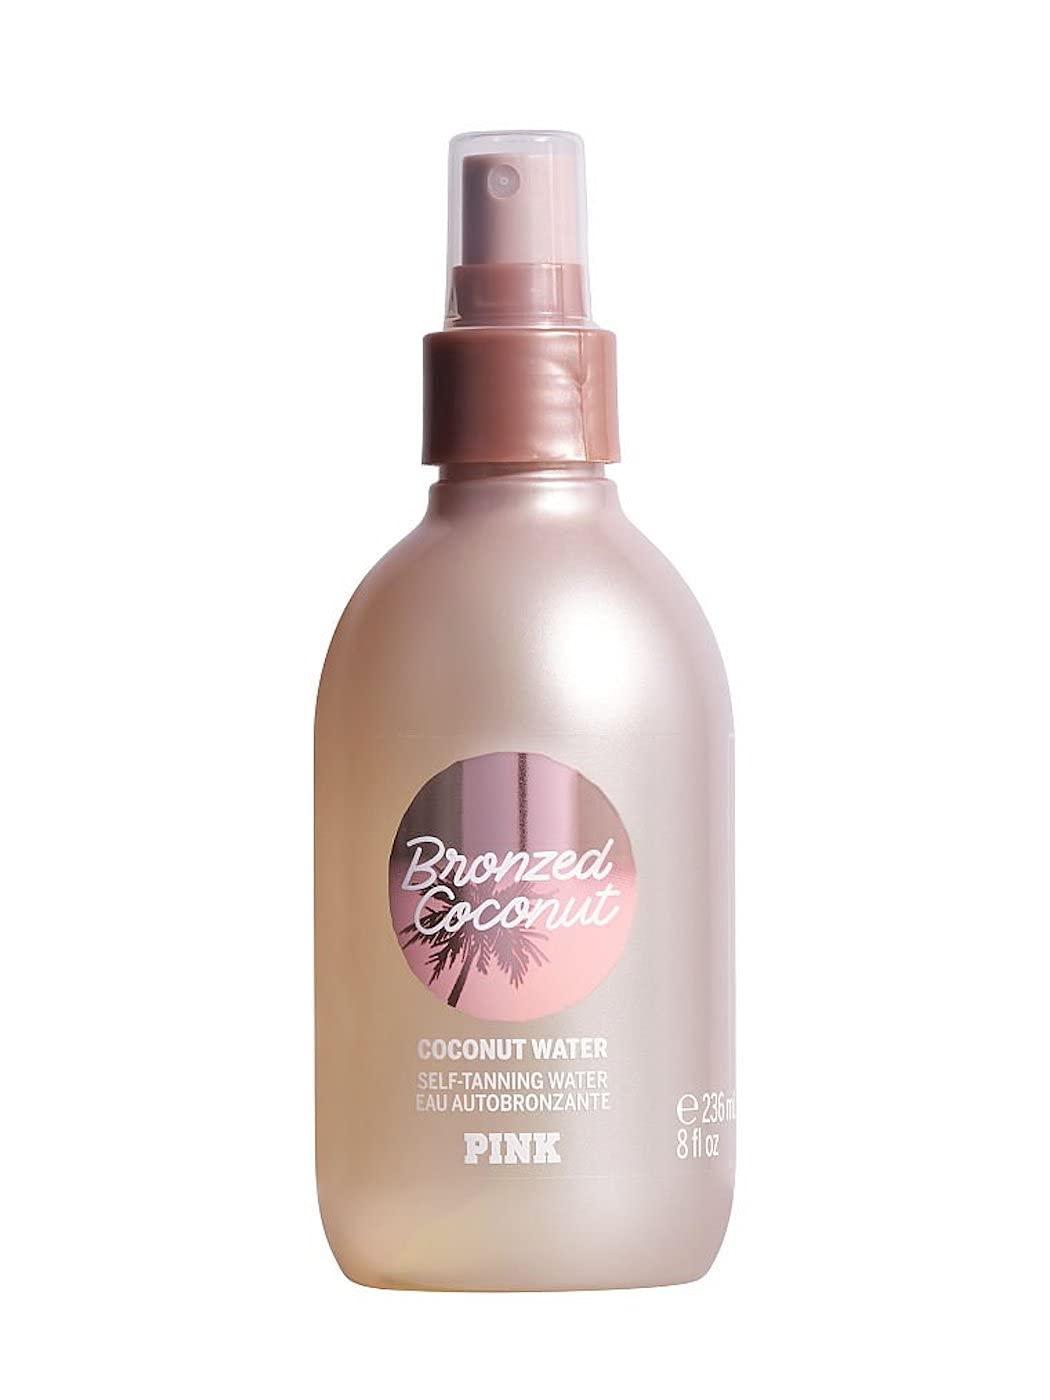 Victoria's Secret Bronzed Coconut Self-Tanning Water with Coconut